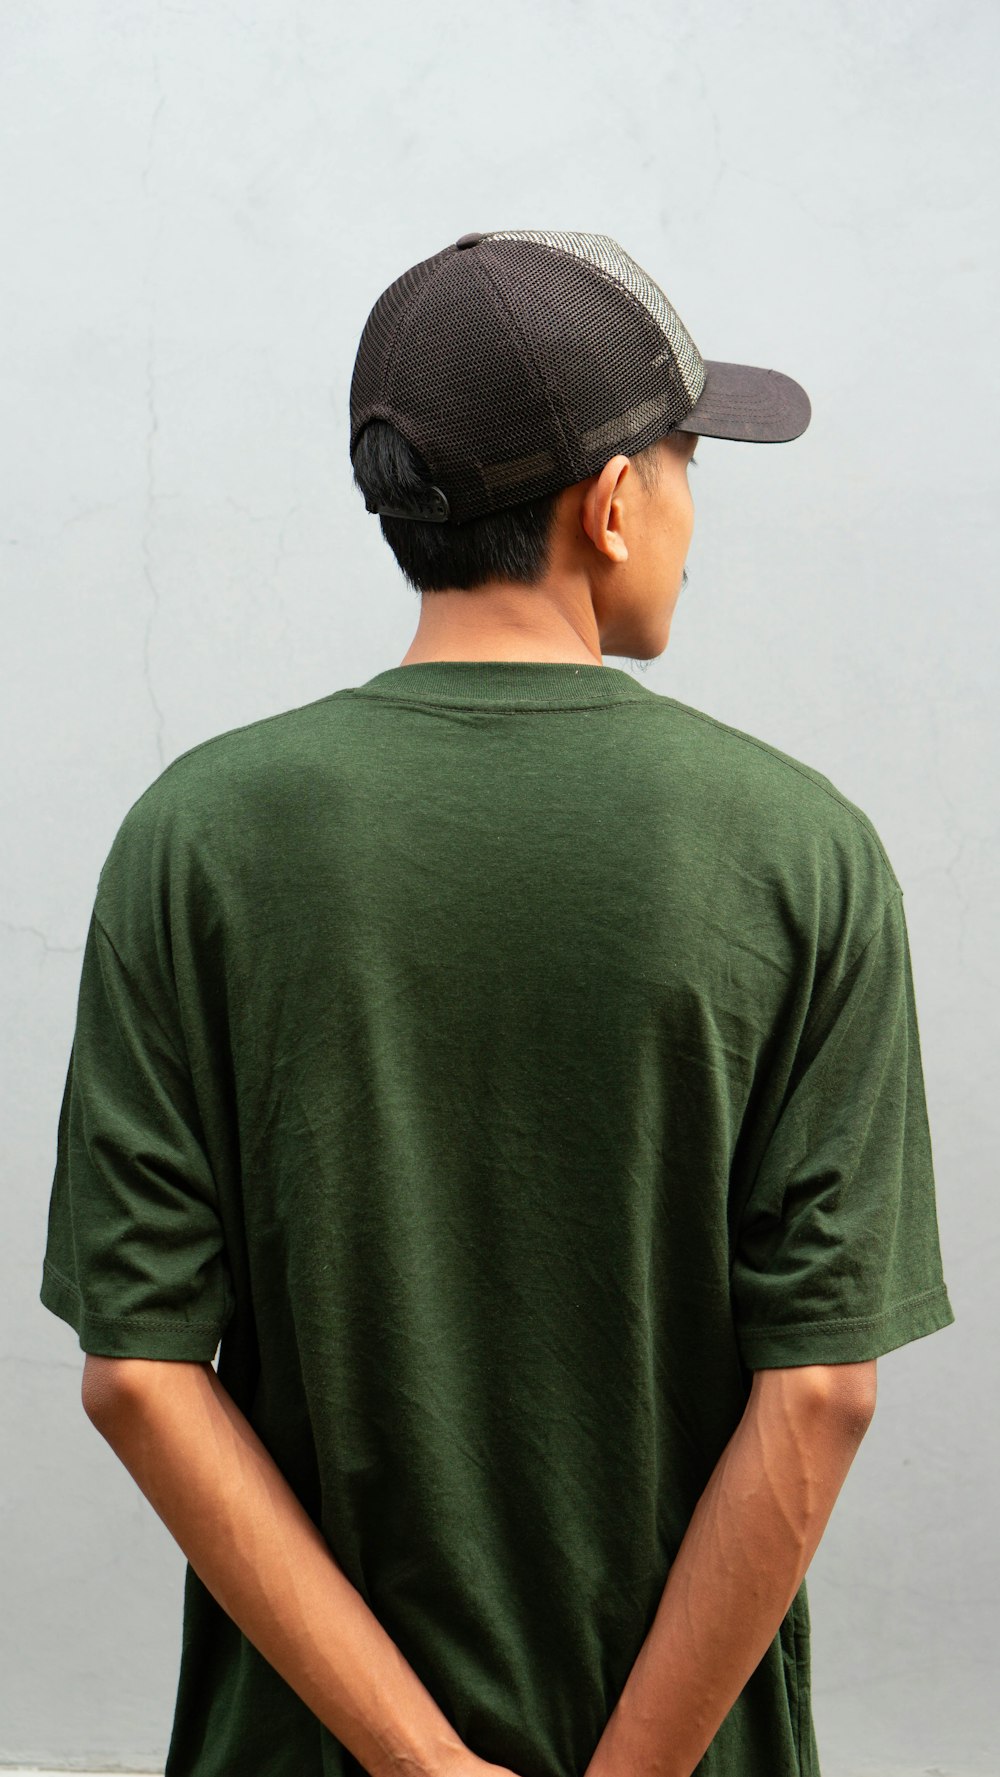 a man wearing a green shirt and a black hat